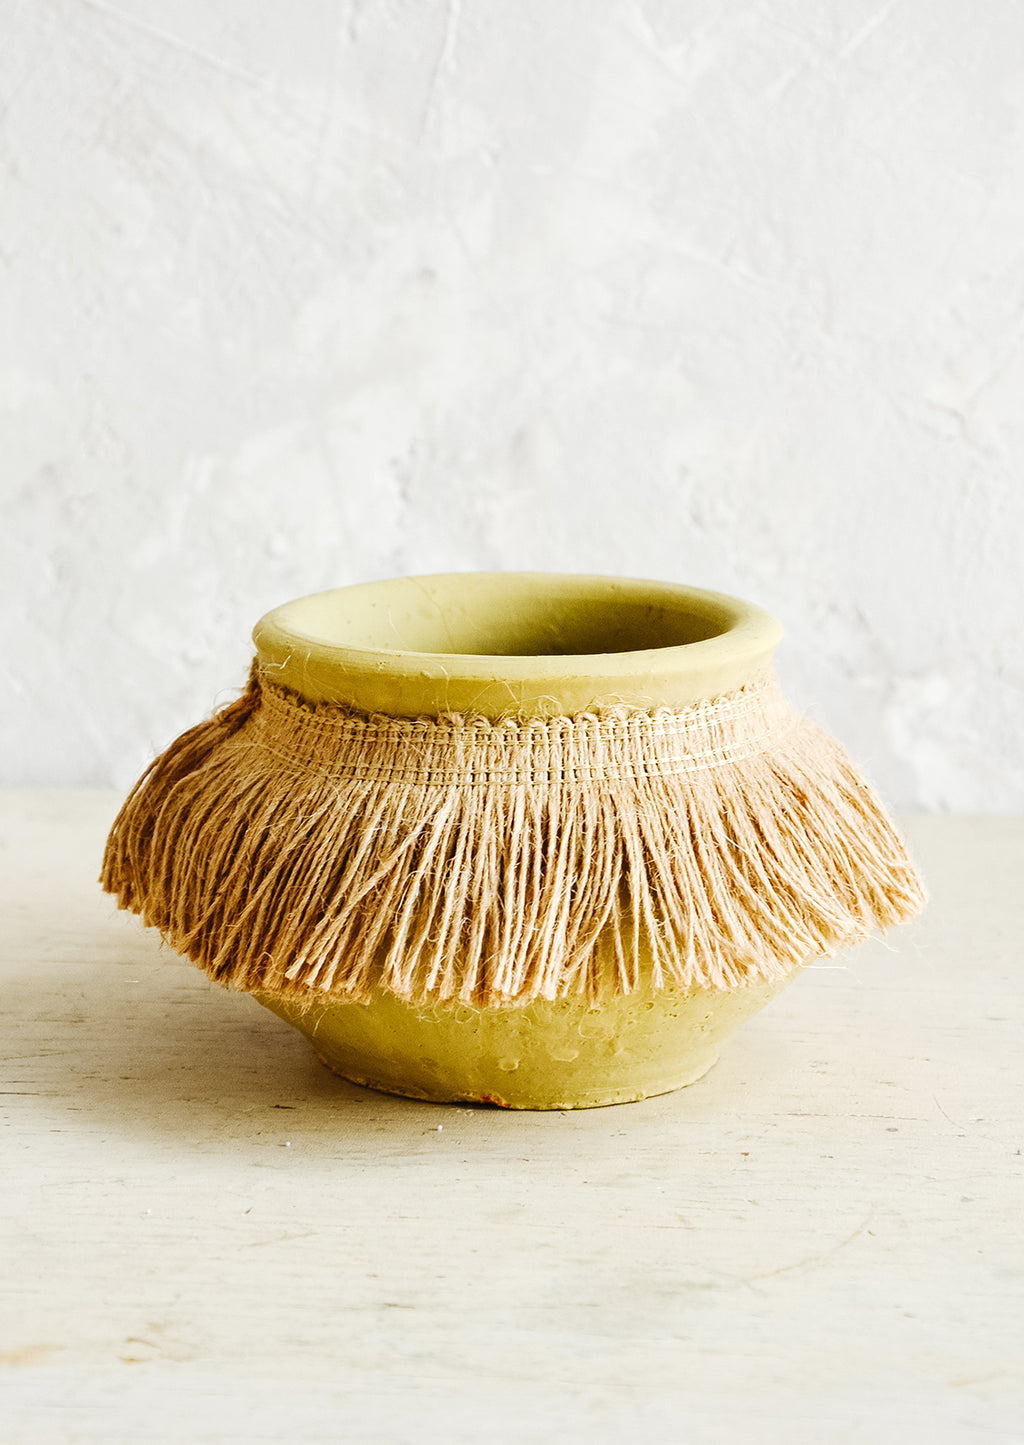 Small: Short, ochre colored clay vase with fringed jute trim around opening